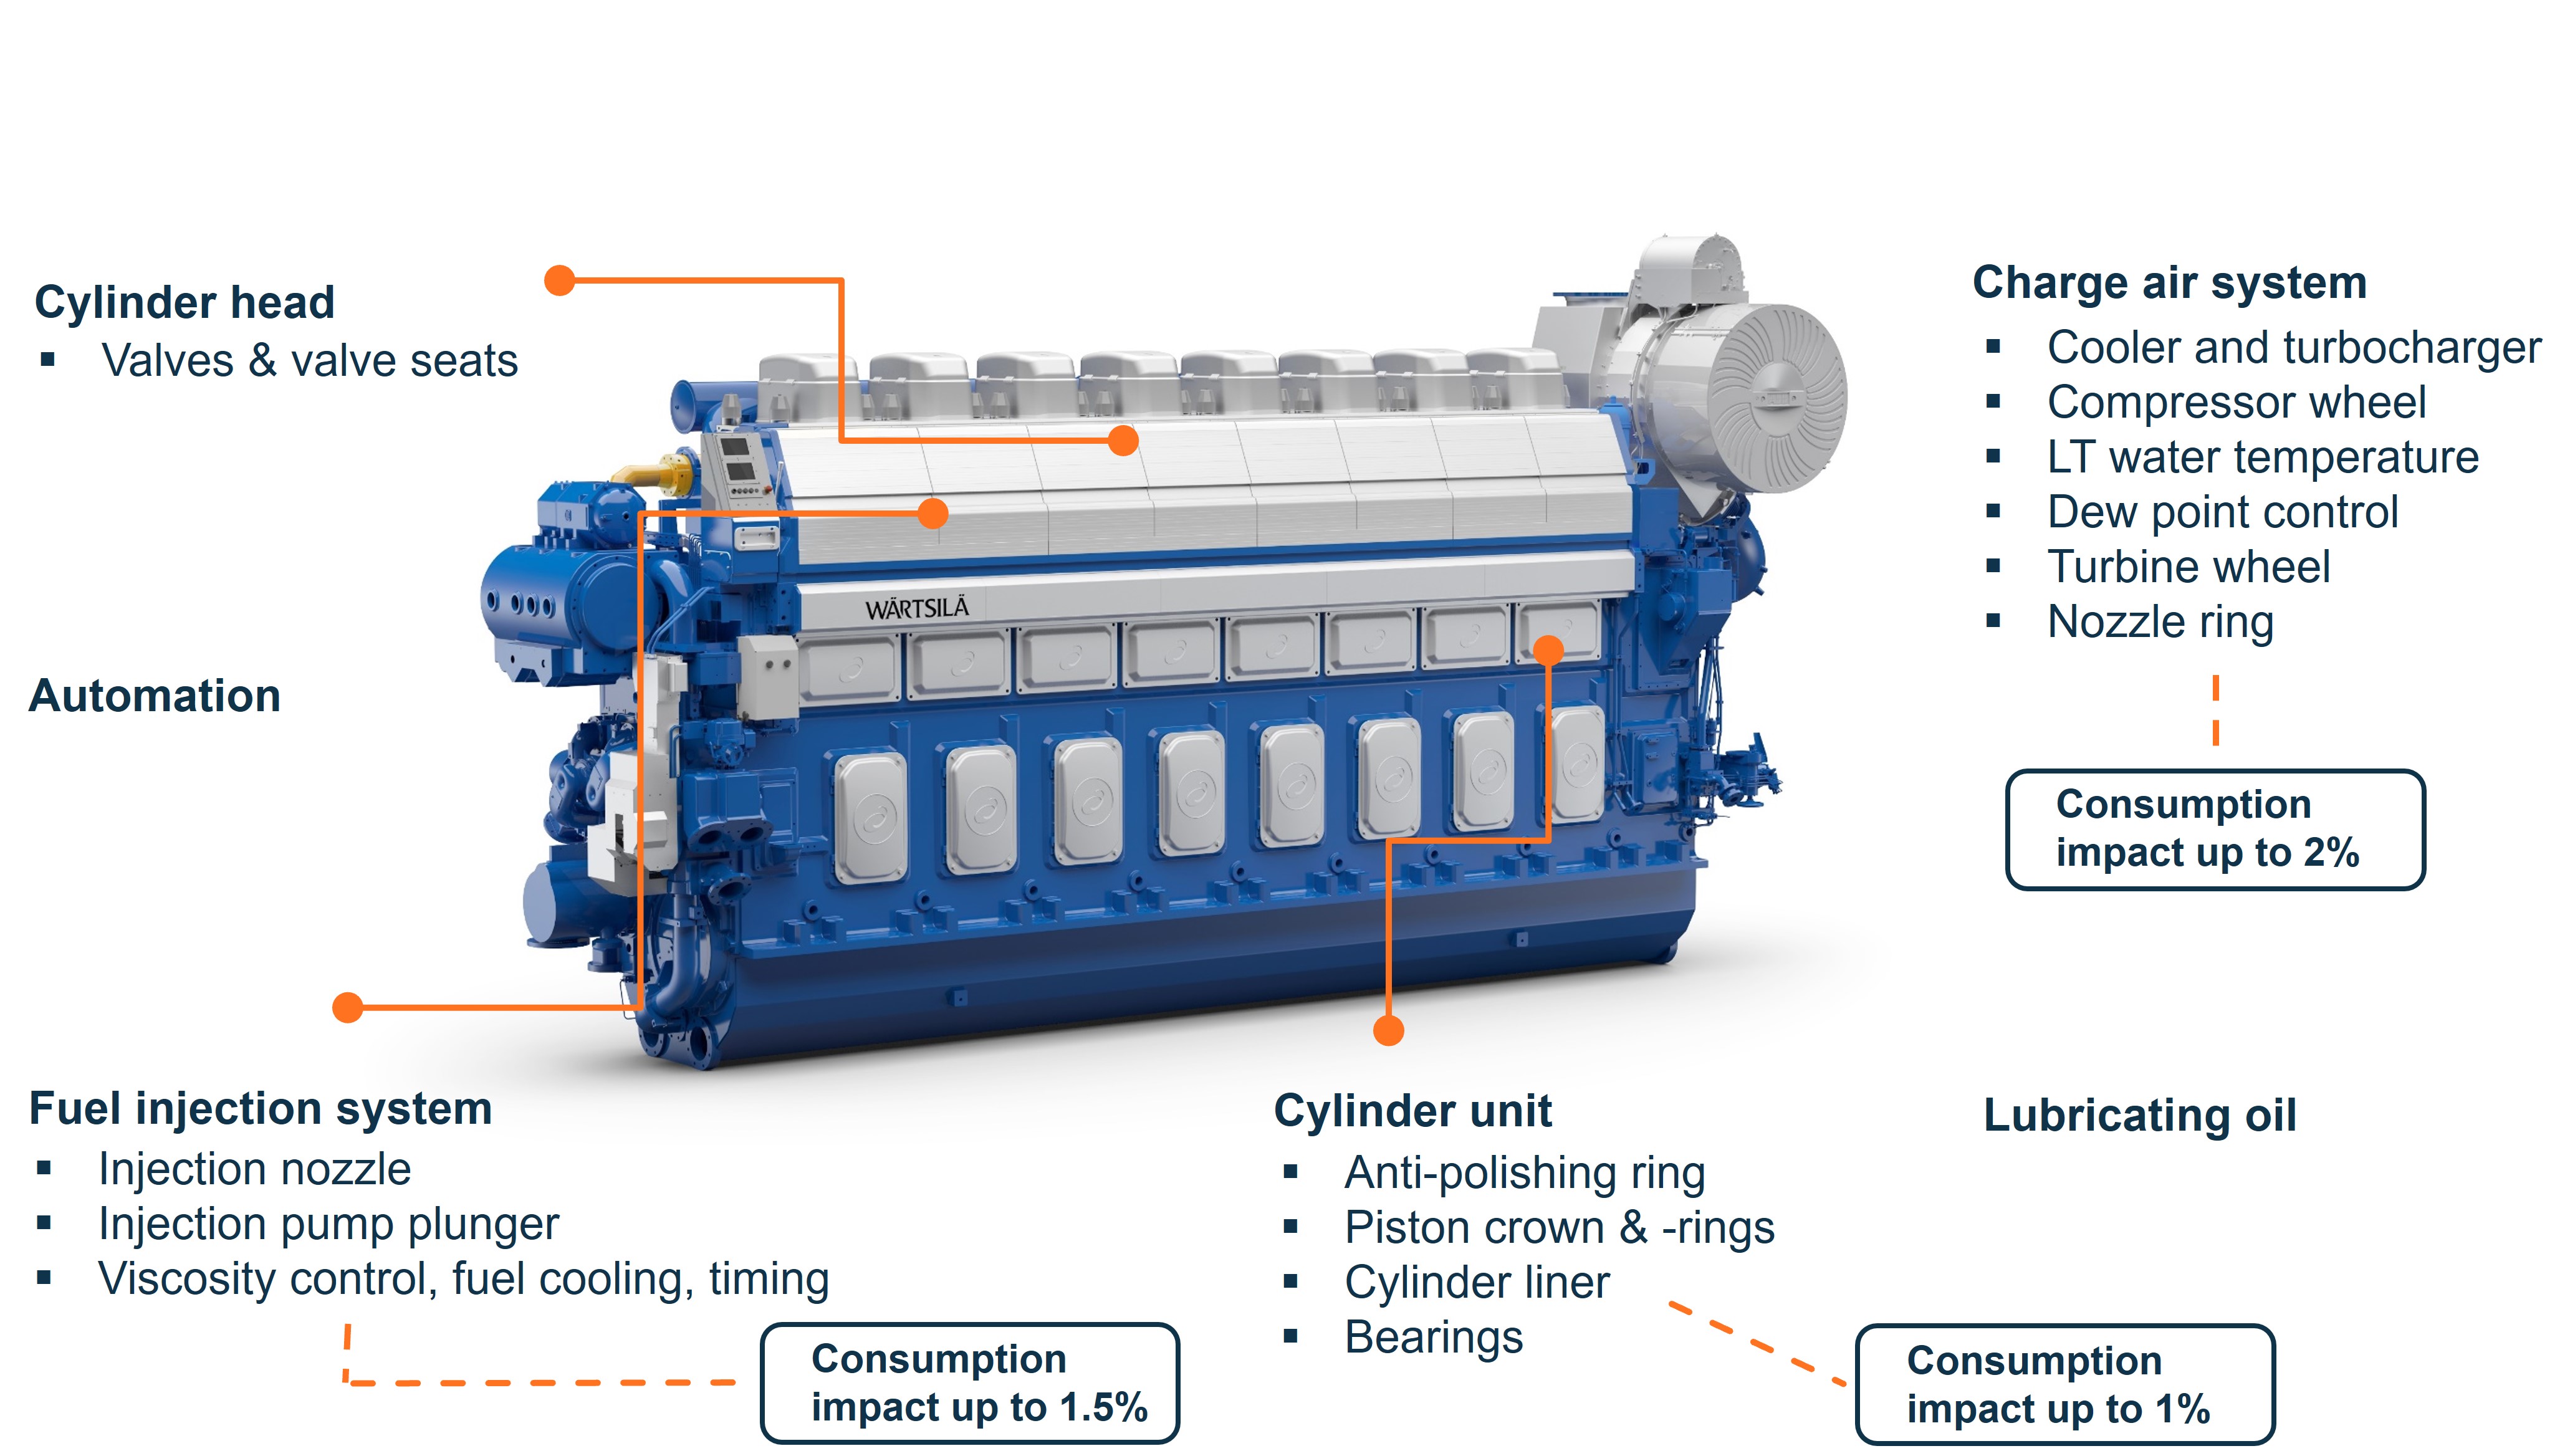 Critical components of vessel engine